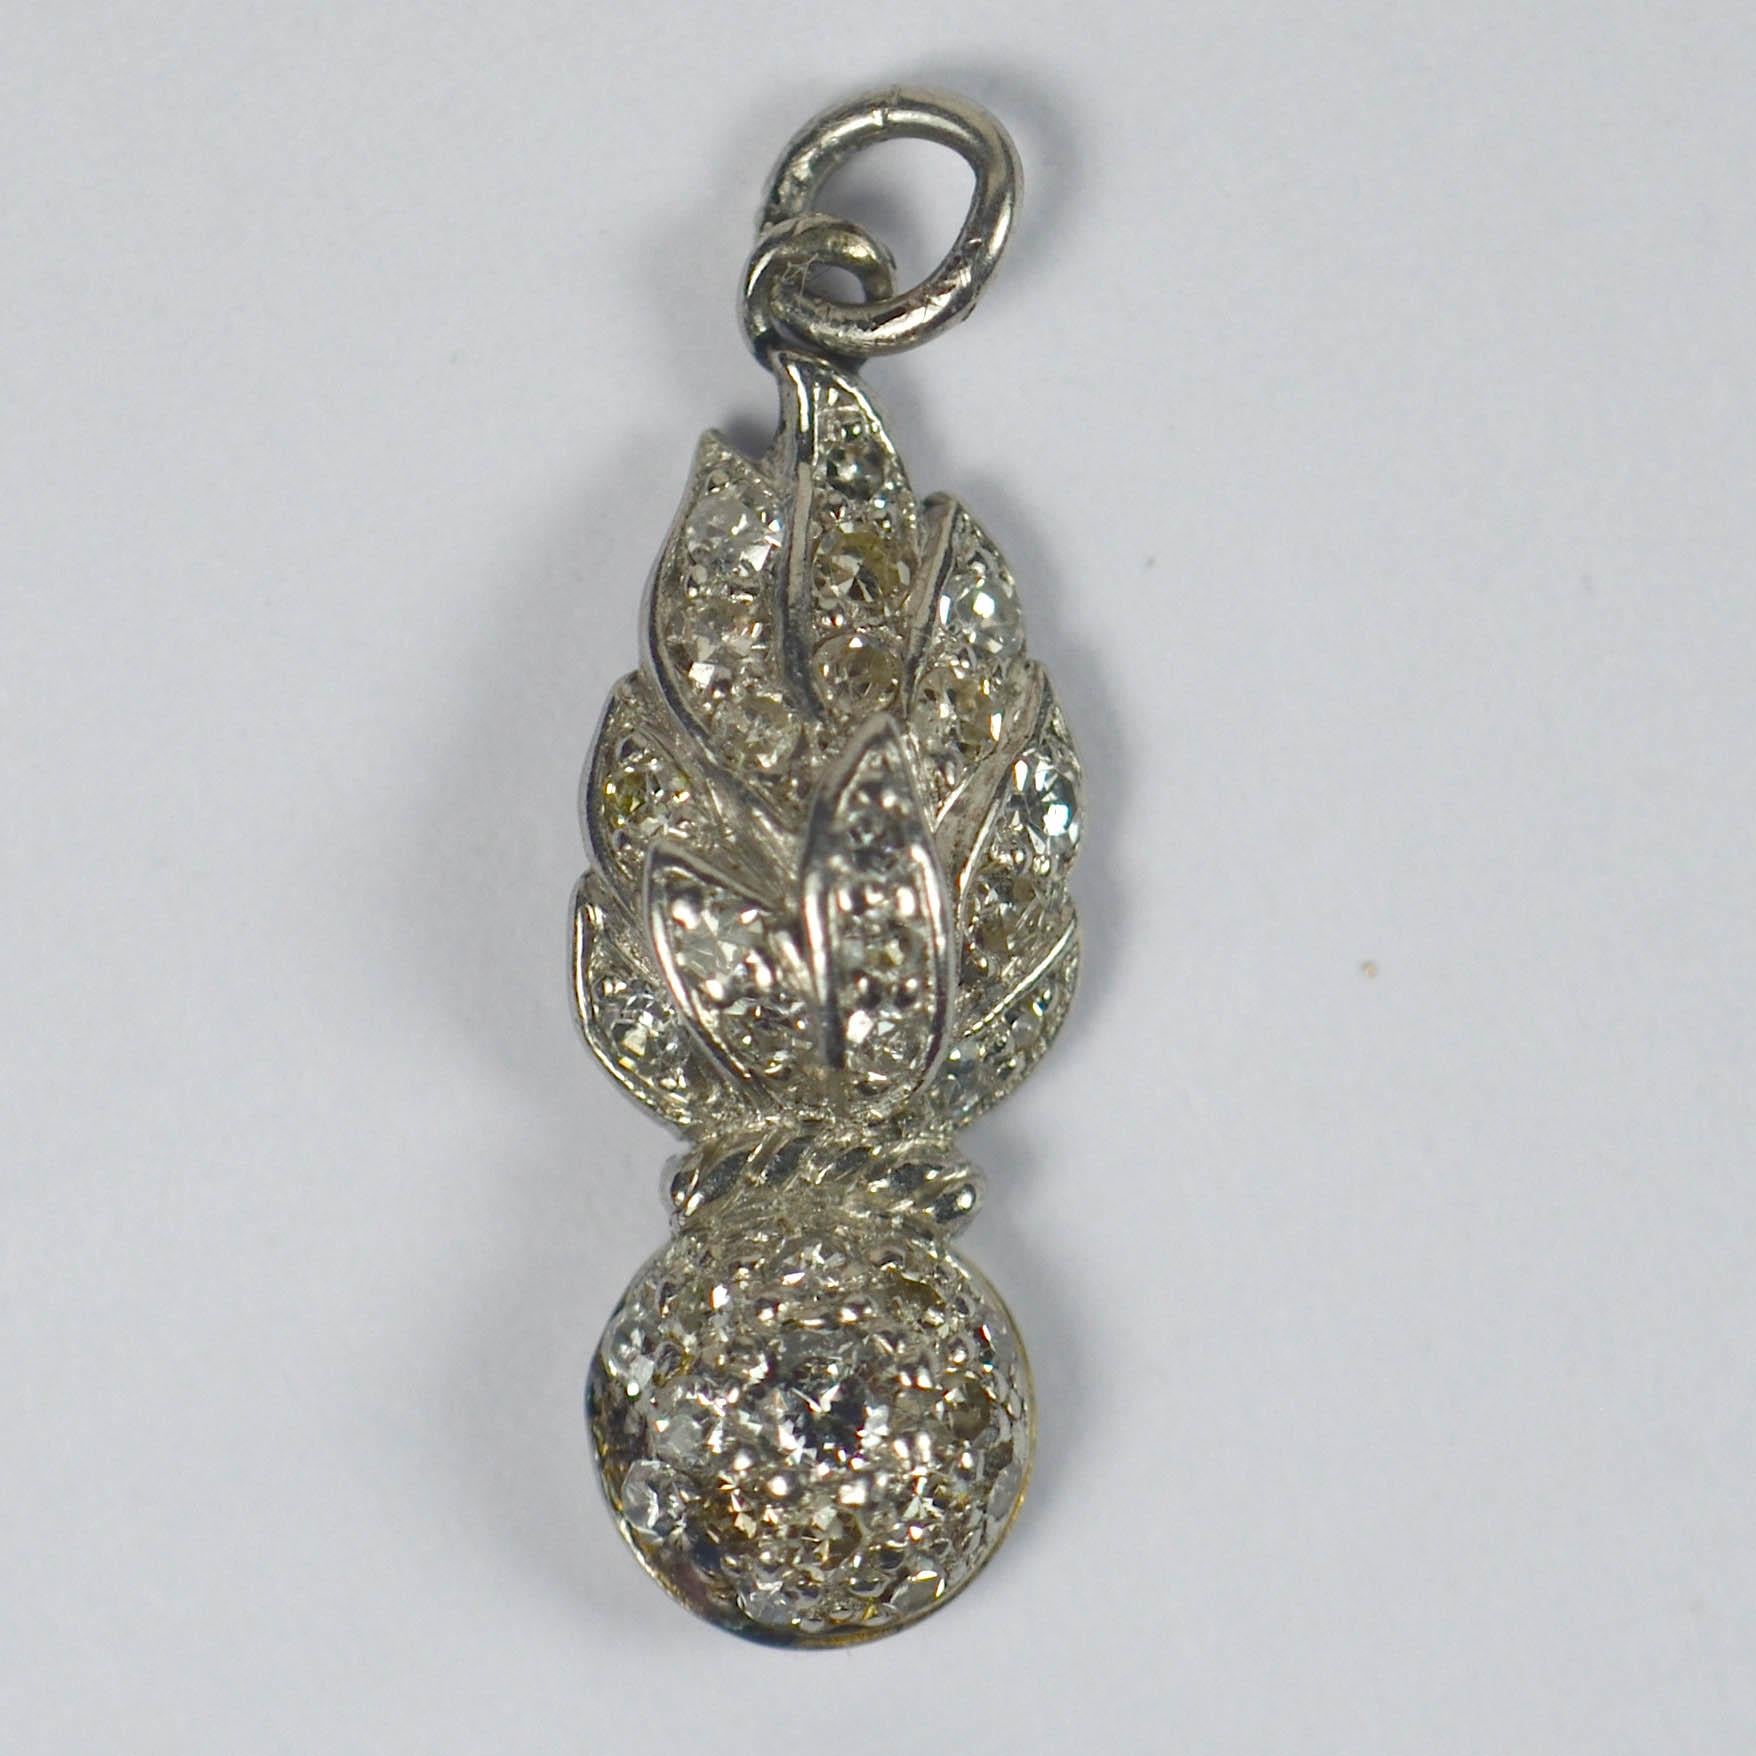 A white gold and diamond set charm pendant depicting the Grenadiers military emblem.

3/4